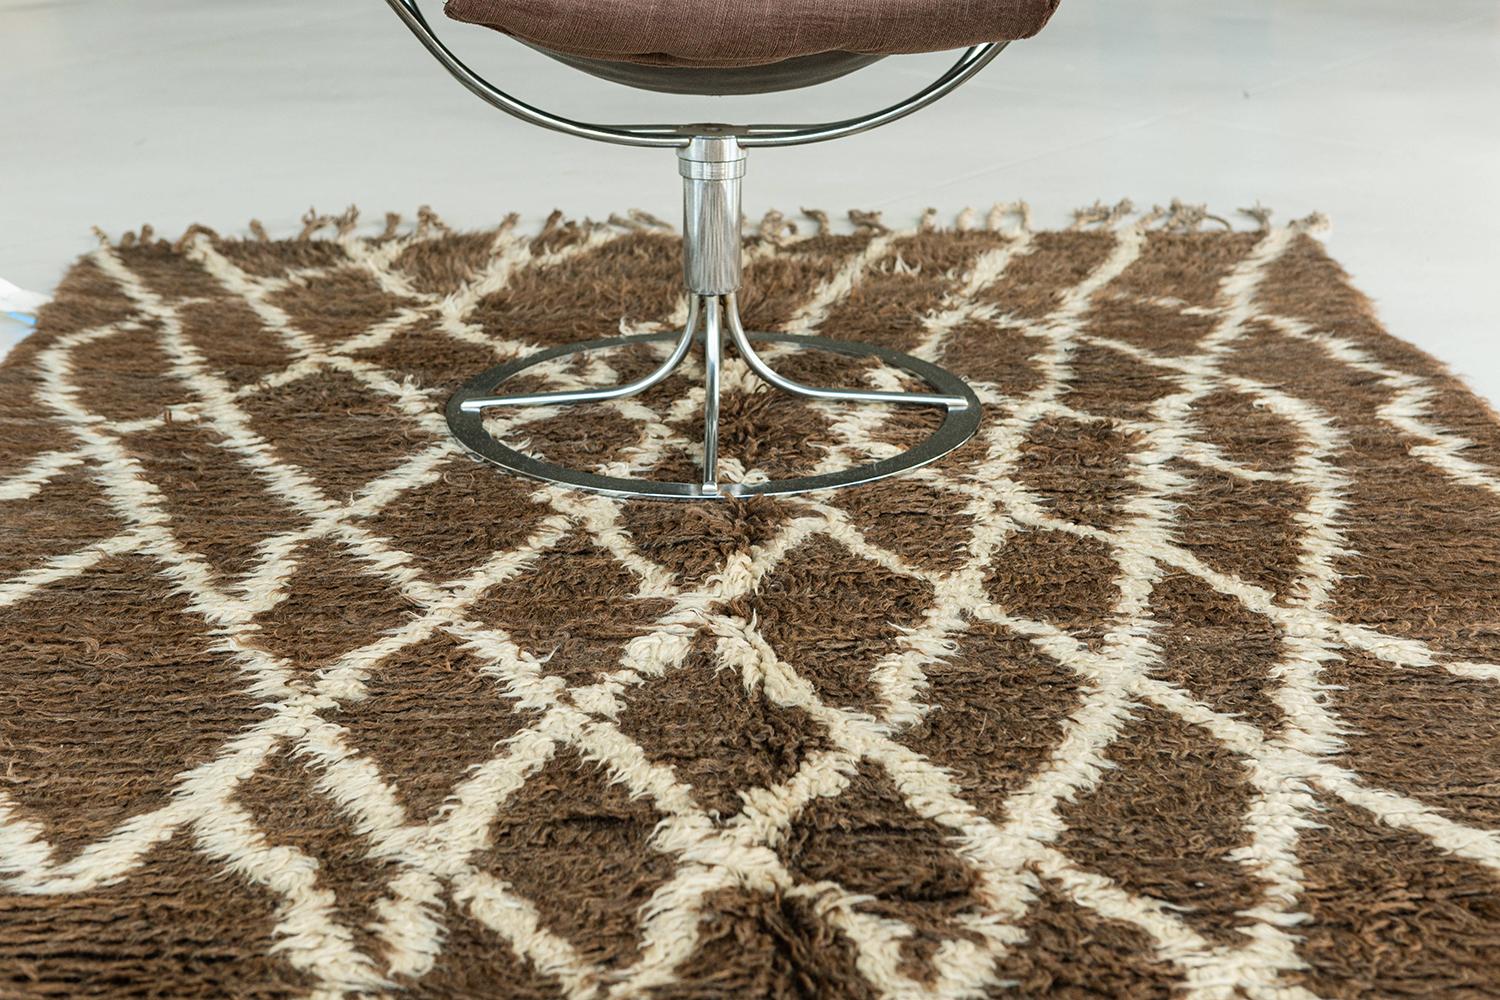 A Minimalist look of Beni Ourain Moroccan rug features an ivory lozenges with extended sides that has diamond pattern in a clay field. Simple but very classy rug with columns aligned diamonds in an inverted all-over design. This rug embodies the